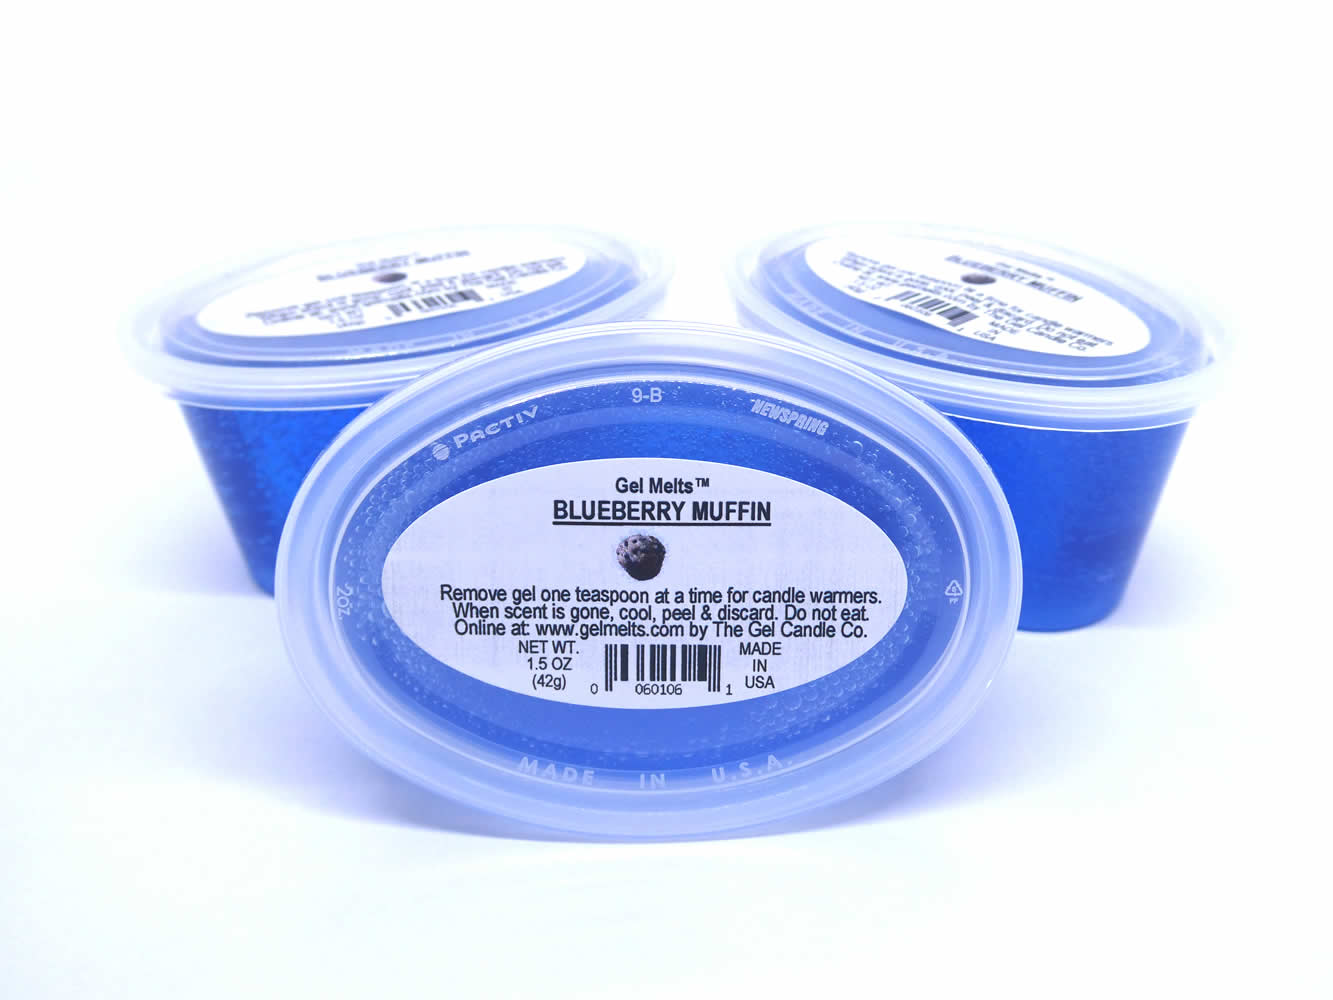  3 Pack COTTON CANDY Aroma Gel Melts™ Gel Wax For